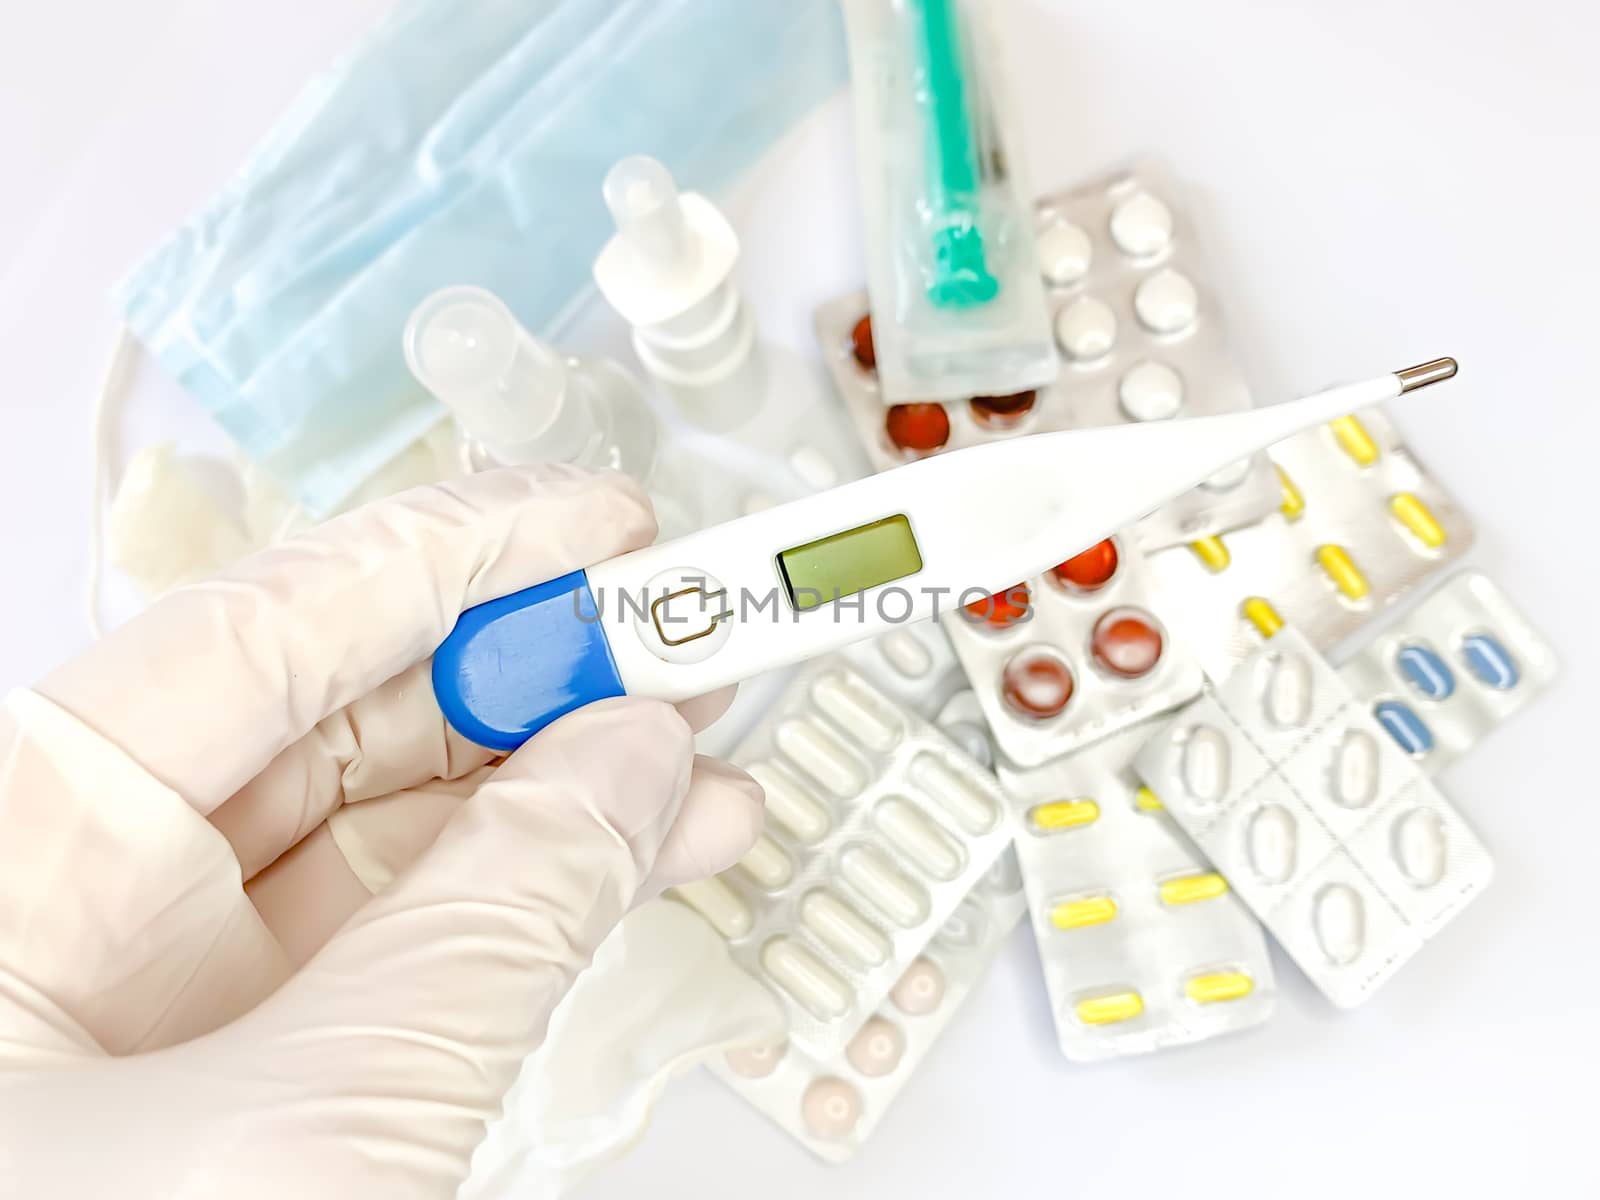 Digital thermometer for measuring body temperature in hand in glove of a woman on white background with many pills and medicines. Horizontal image